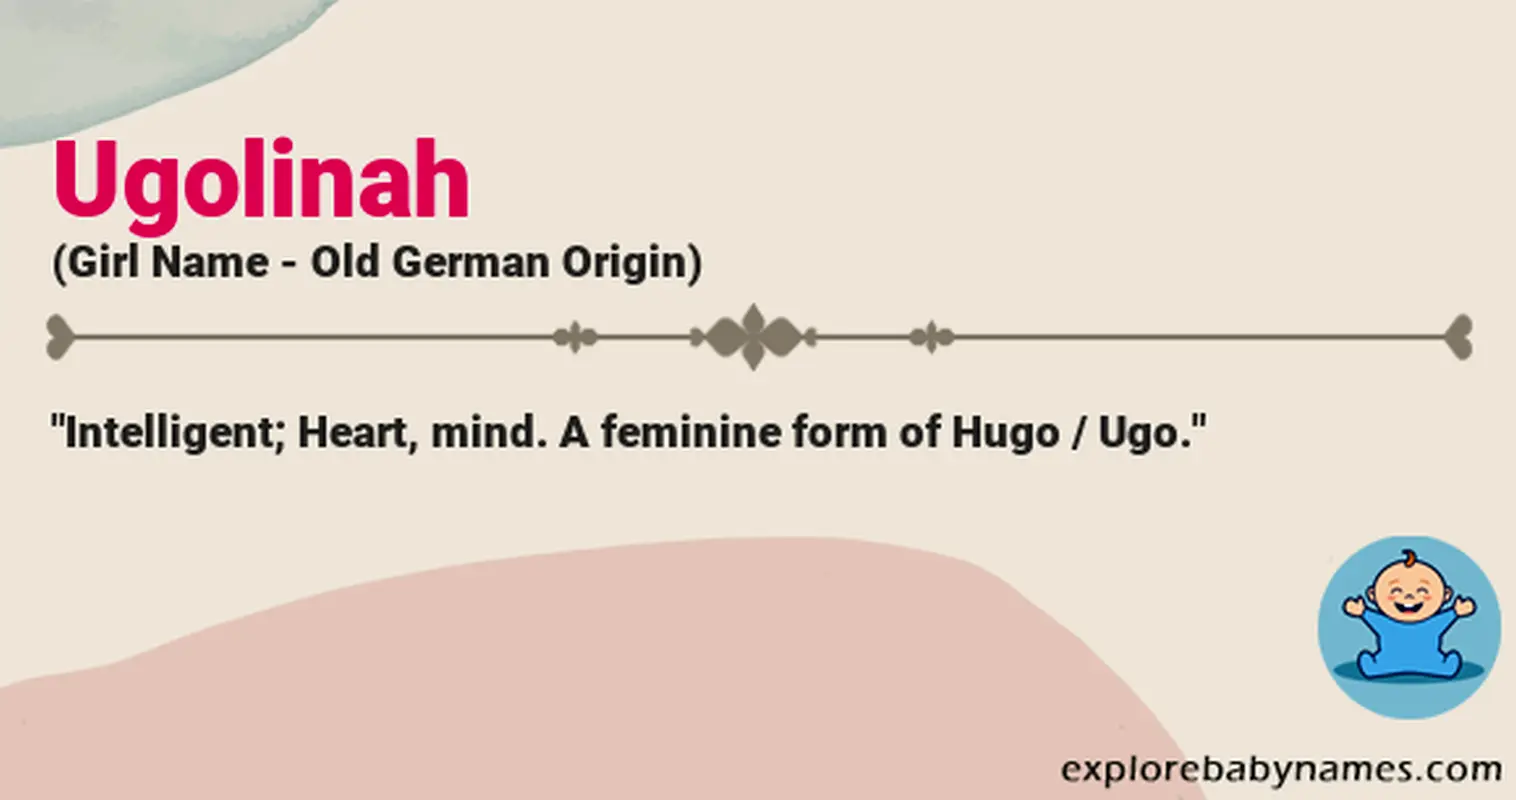 Meaning of Ugolinah